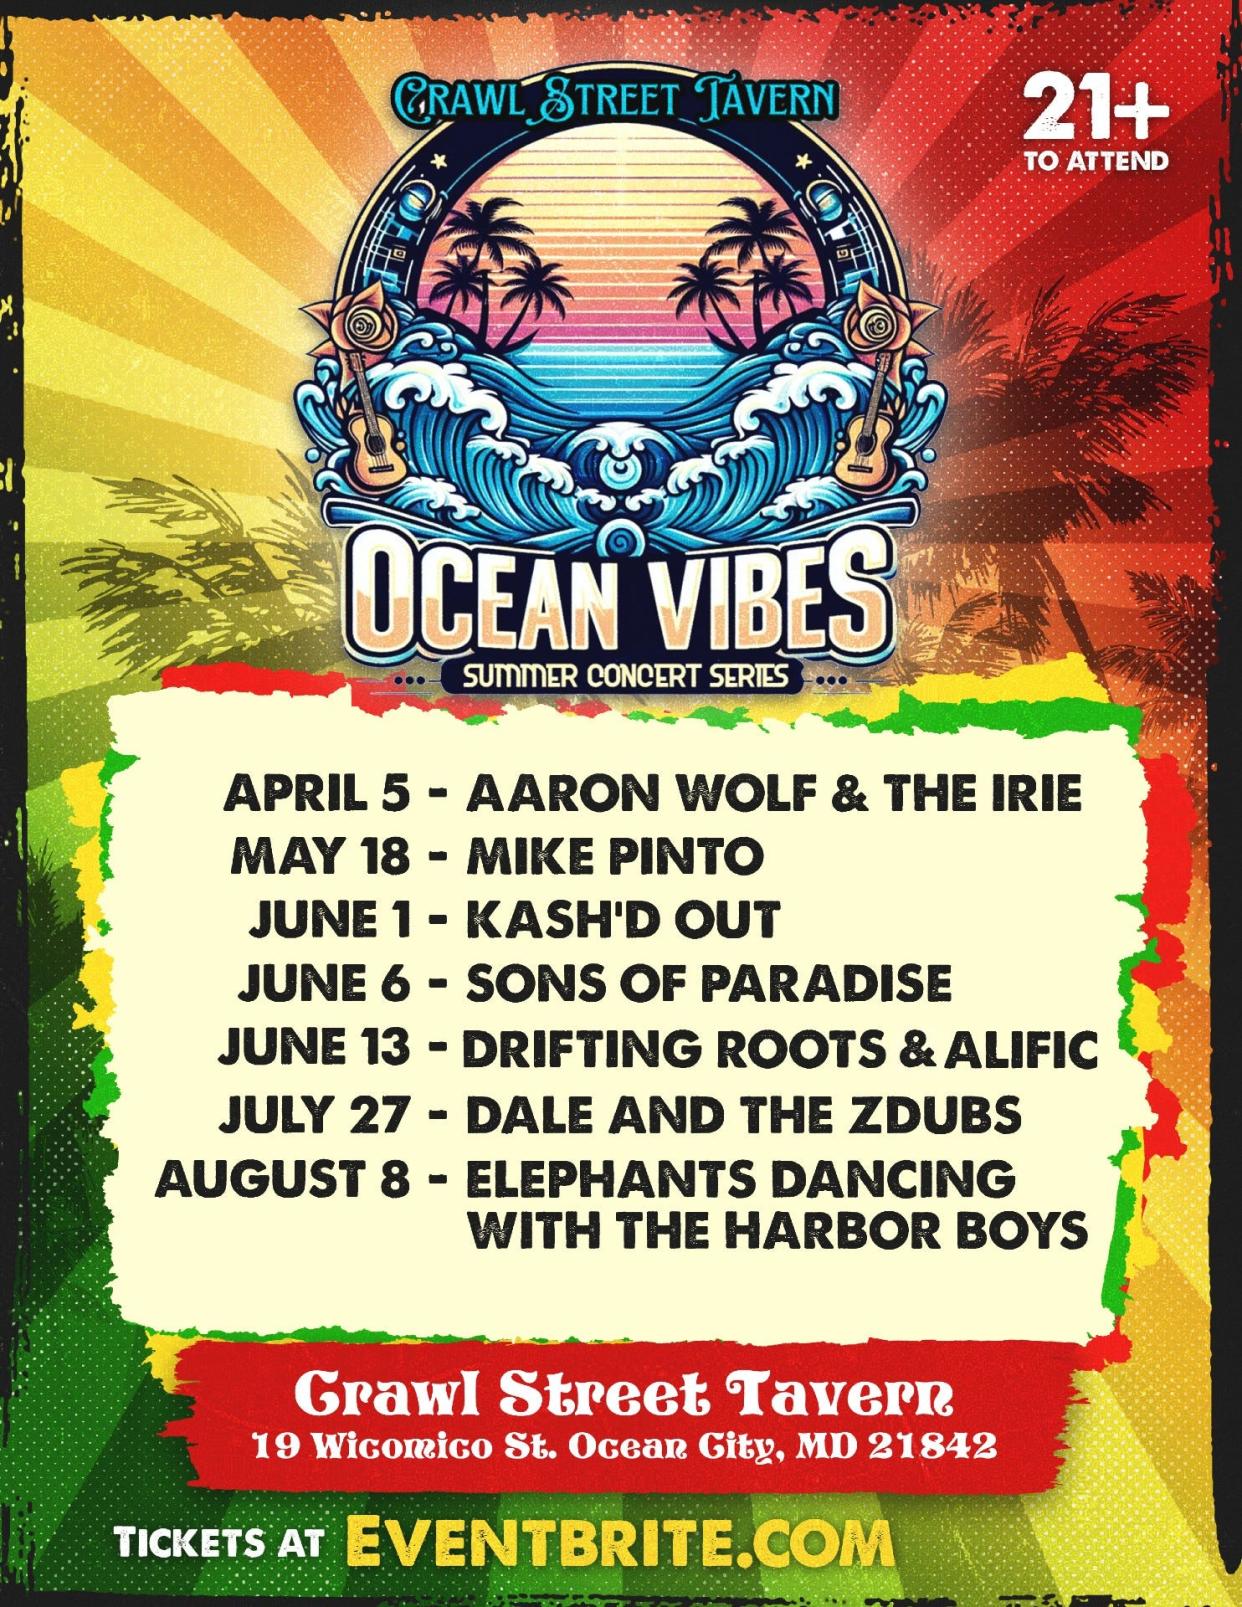 Crawl Street Tavern, located at 19 Wicomico St. in Ocean City, Maryland, has announced its 2024 Ocean Vibes Summer Concert Series schedule.